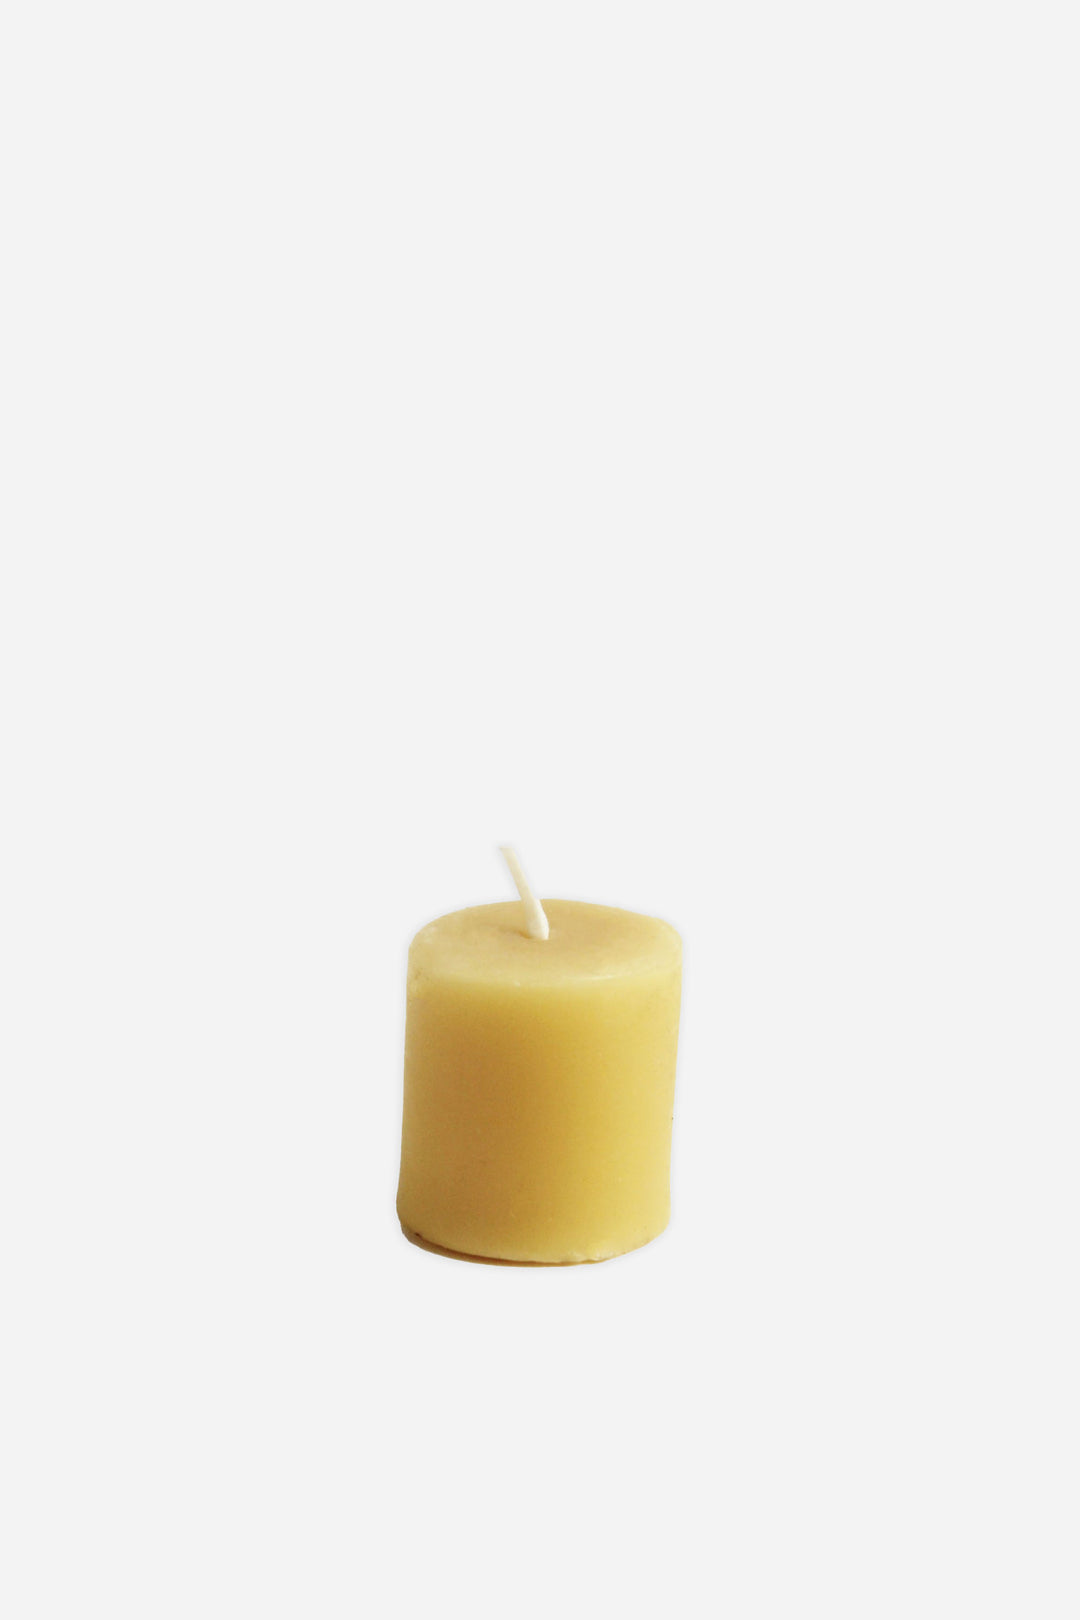 Large Beeswax Tea Light - Domestic Science Home